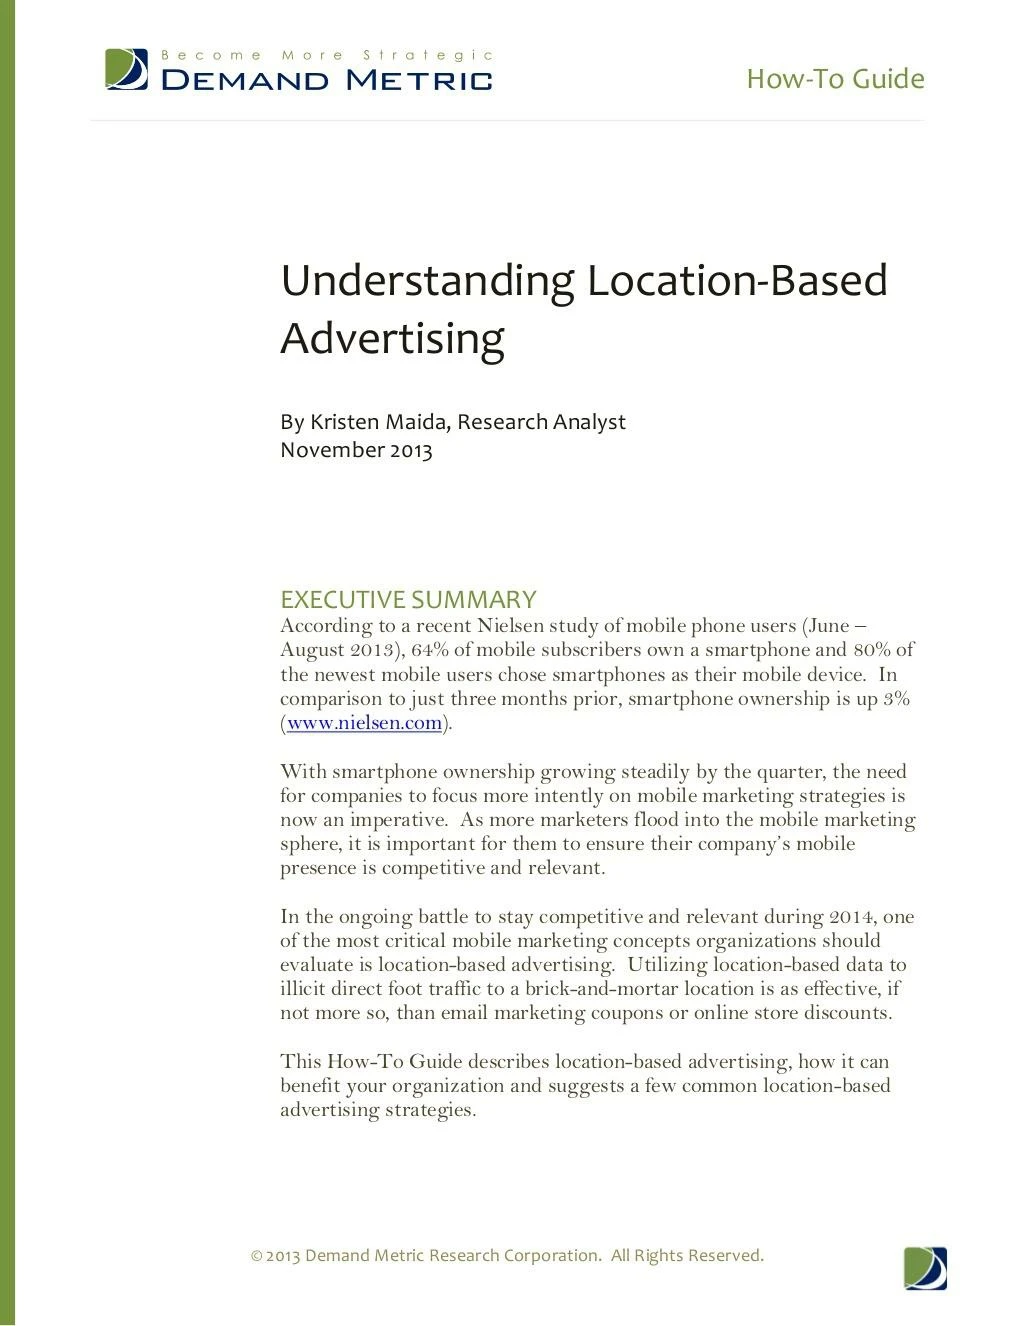 how to guide understanding location based advertising